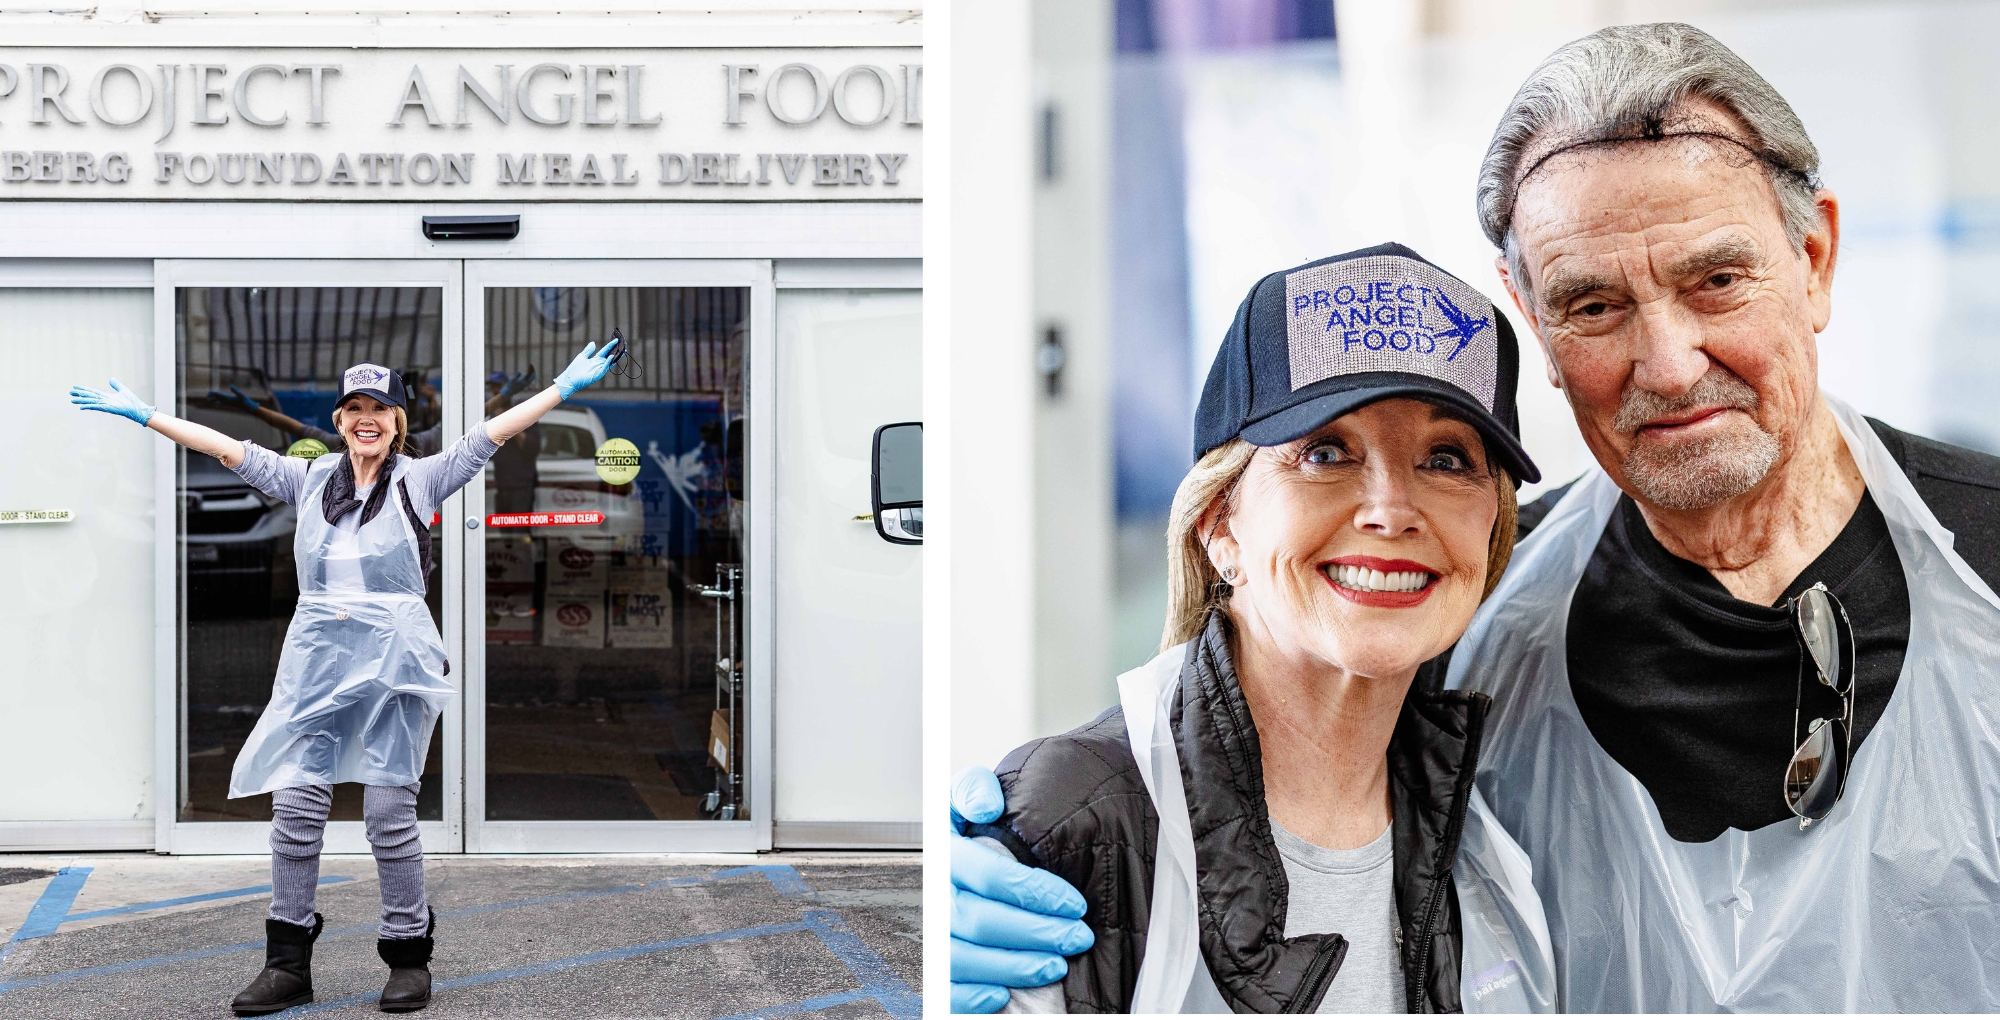 young and the restless stars melody thomas scott and eric braeden at project angel food.